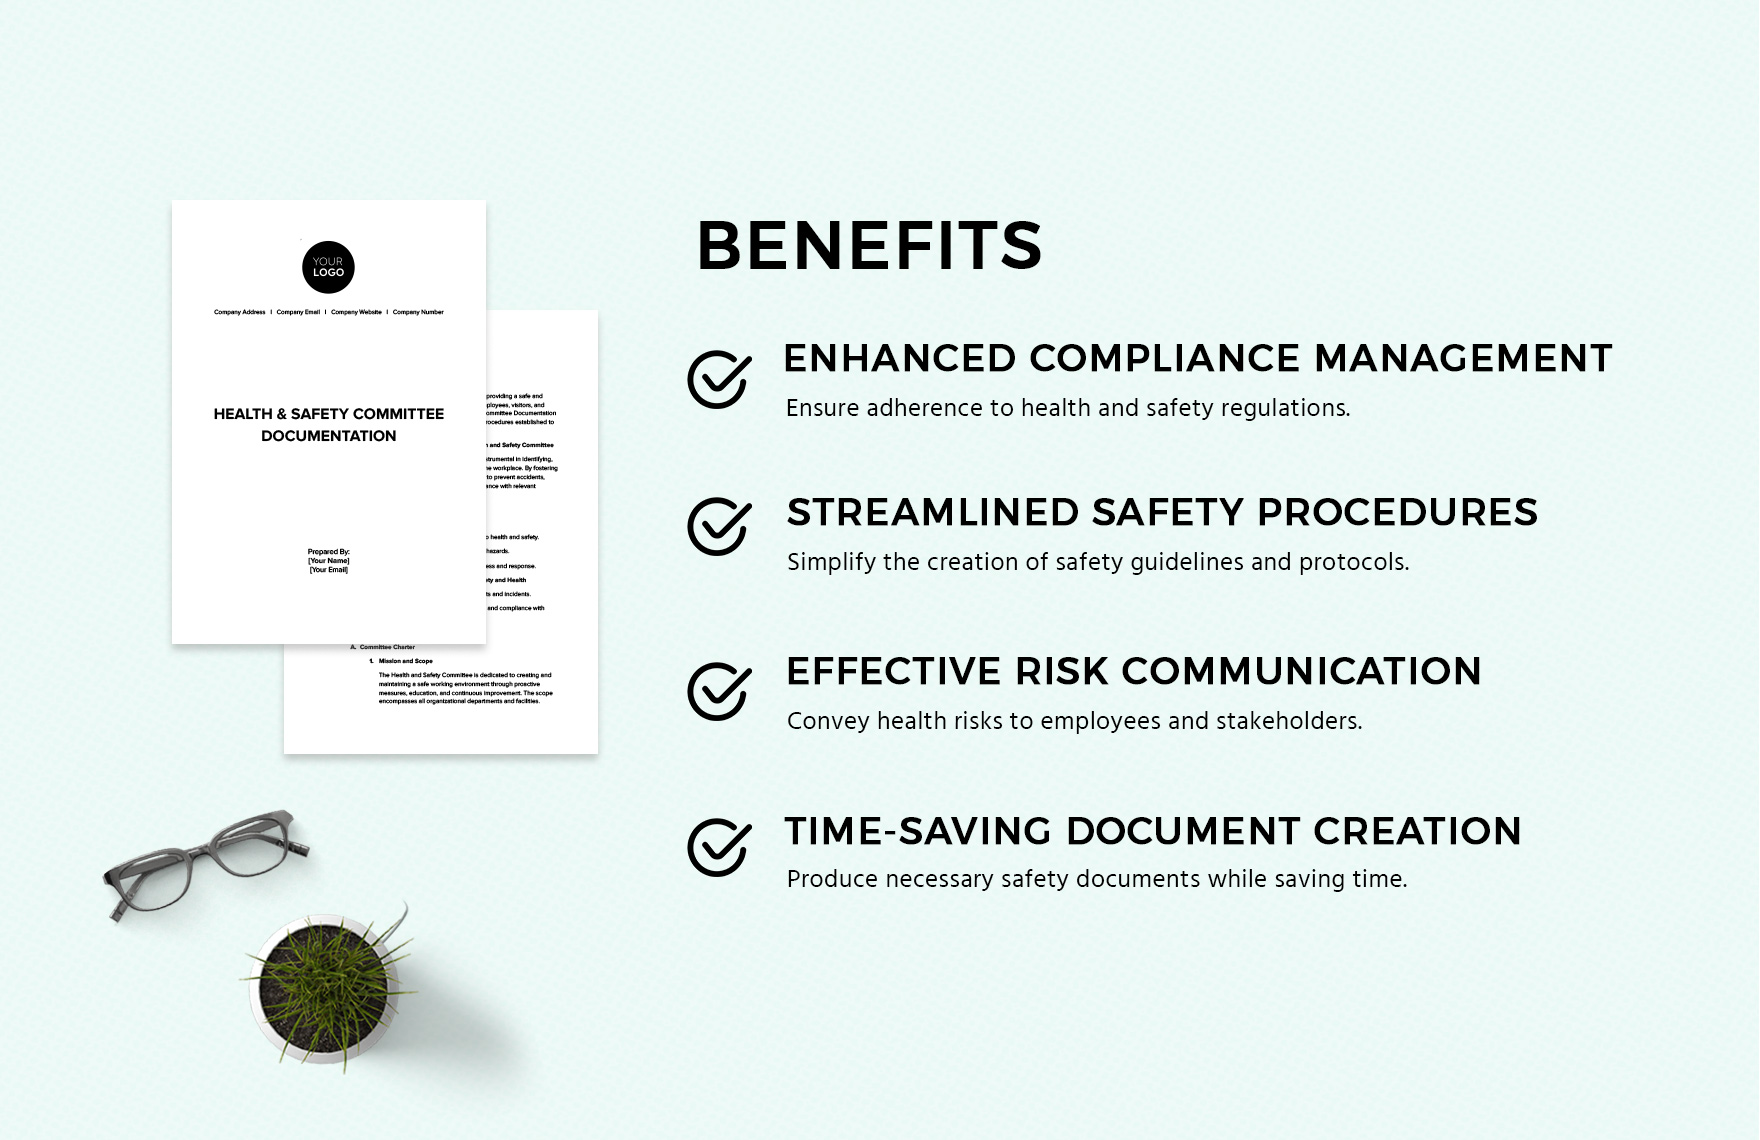 Health & Safety Committee Documentation Template